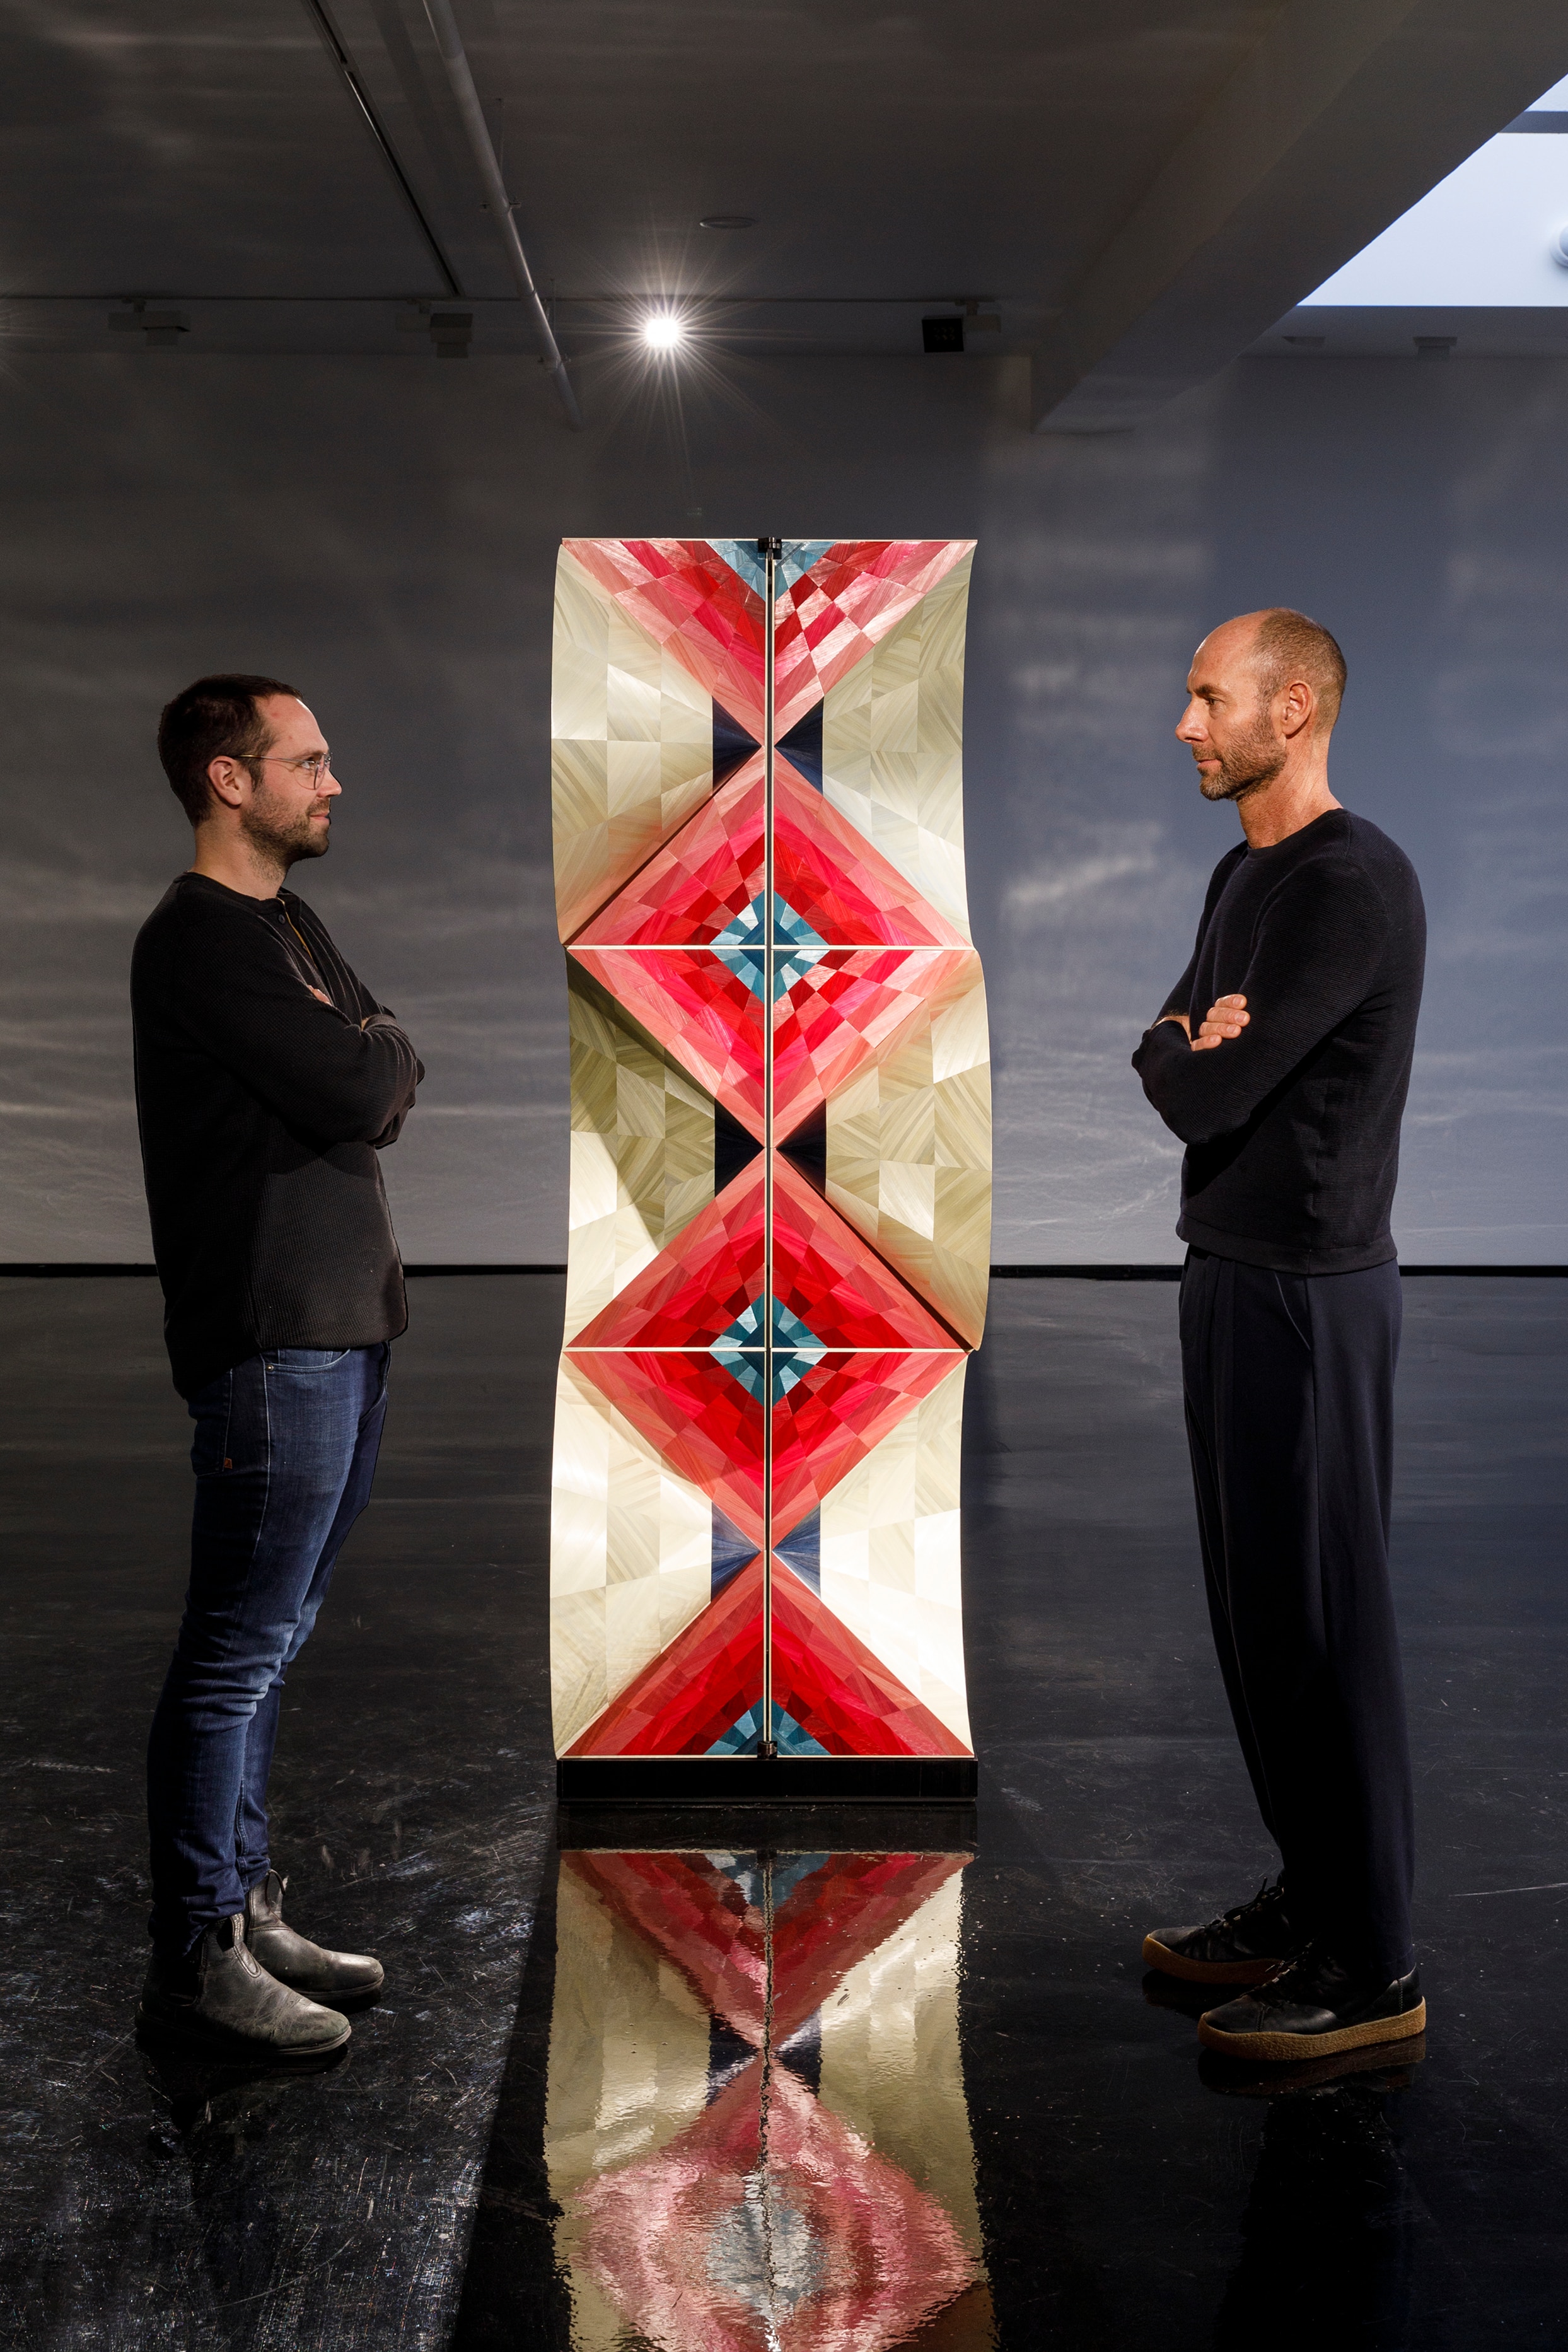 Two men stand on either side of an artwork - a thin box that stands tall, with an odd wavy illusion via its gold-red patterns